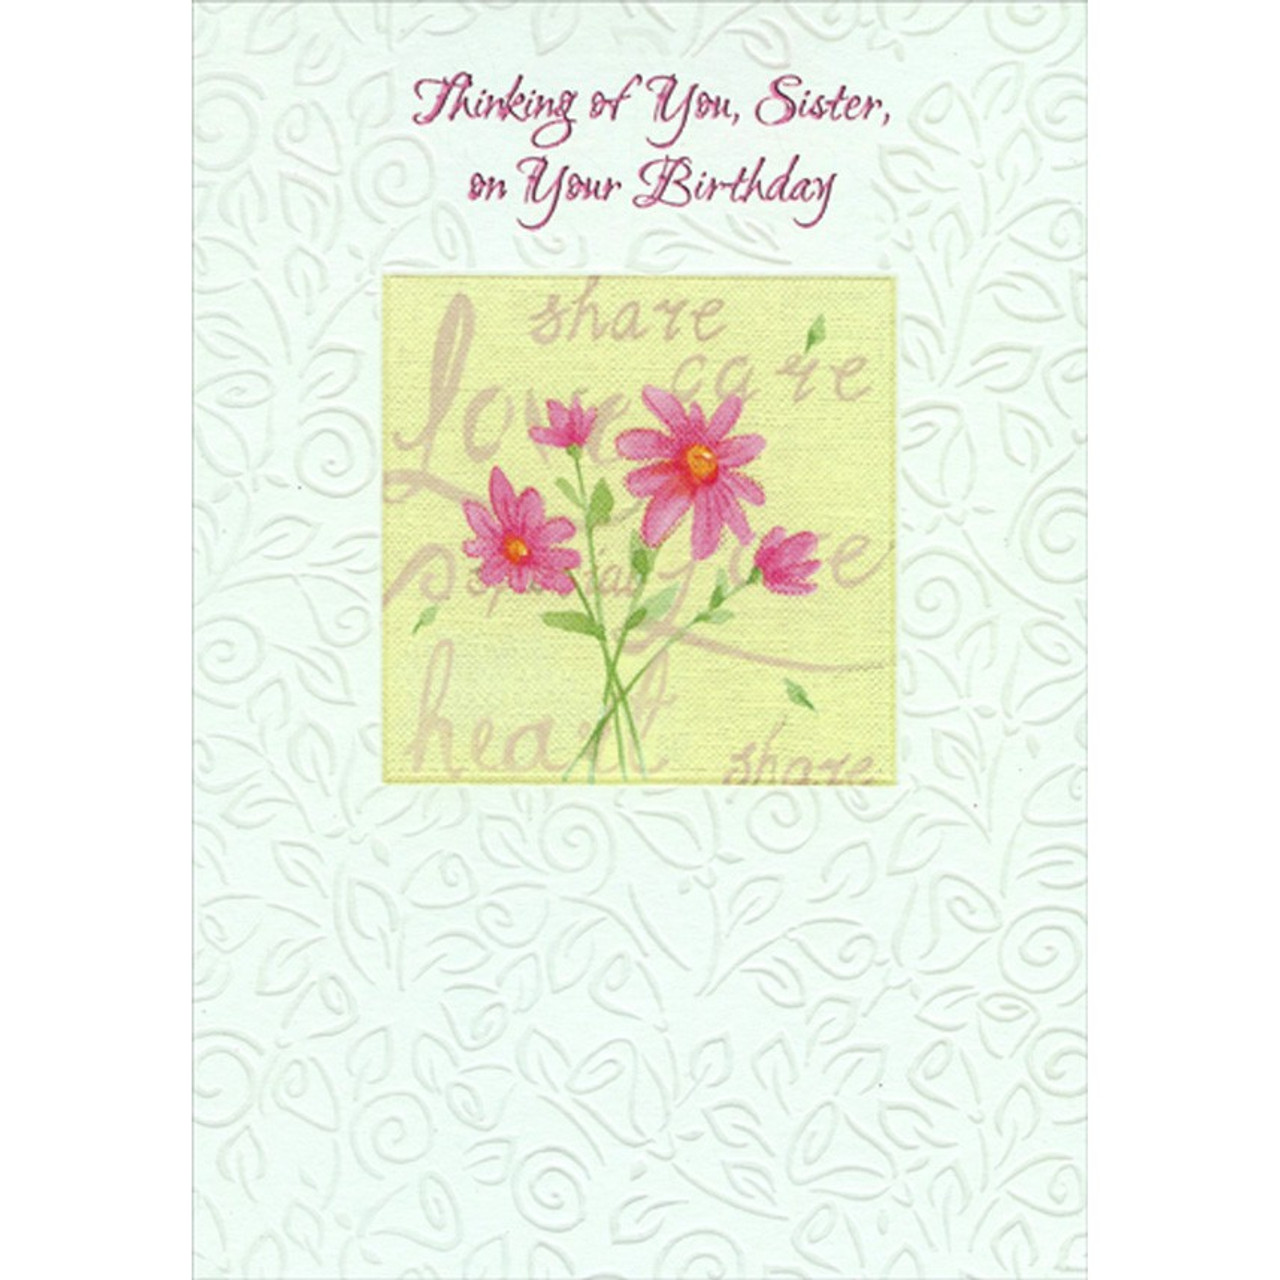 https://cdn11.bigcommerce.com/s-o3ewkiqyx3/images/stencil/1280x1280/products/3779/7922/cd14478-four-pink-flowers-in-light-yellow-square-frame-sister-birthday-card__23663.1656345457.jpg?c=1